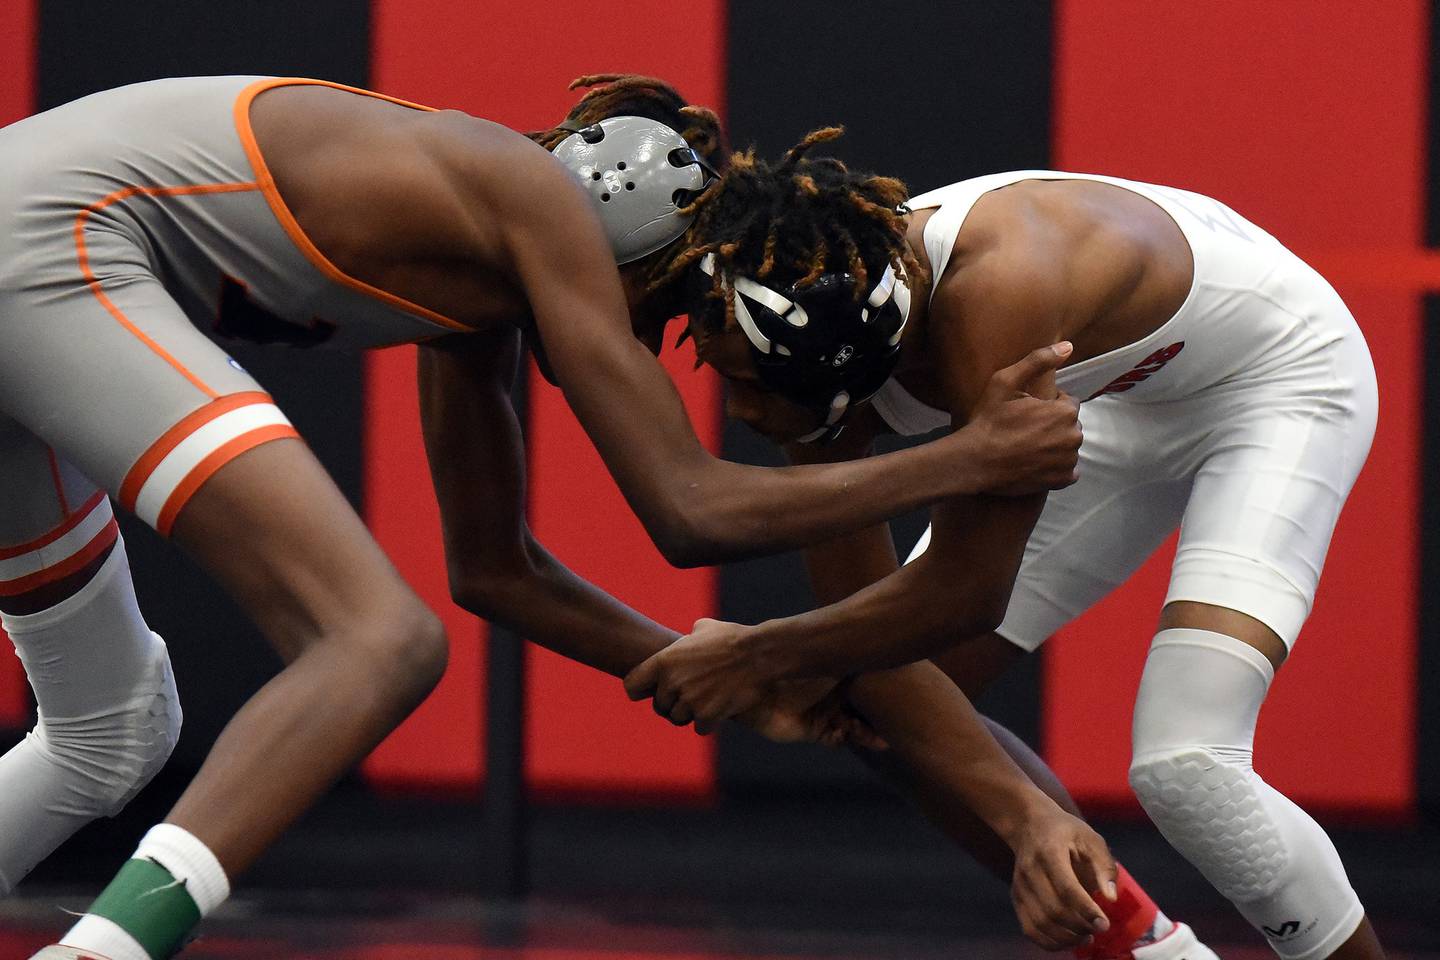 Rich Township's Diondre Henry tangles with Romeoville's Savion Essiet during the 106-pound championship match at the Raptor Invitational in Richton Park on Saturday, Dec. 17, 2022.